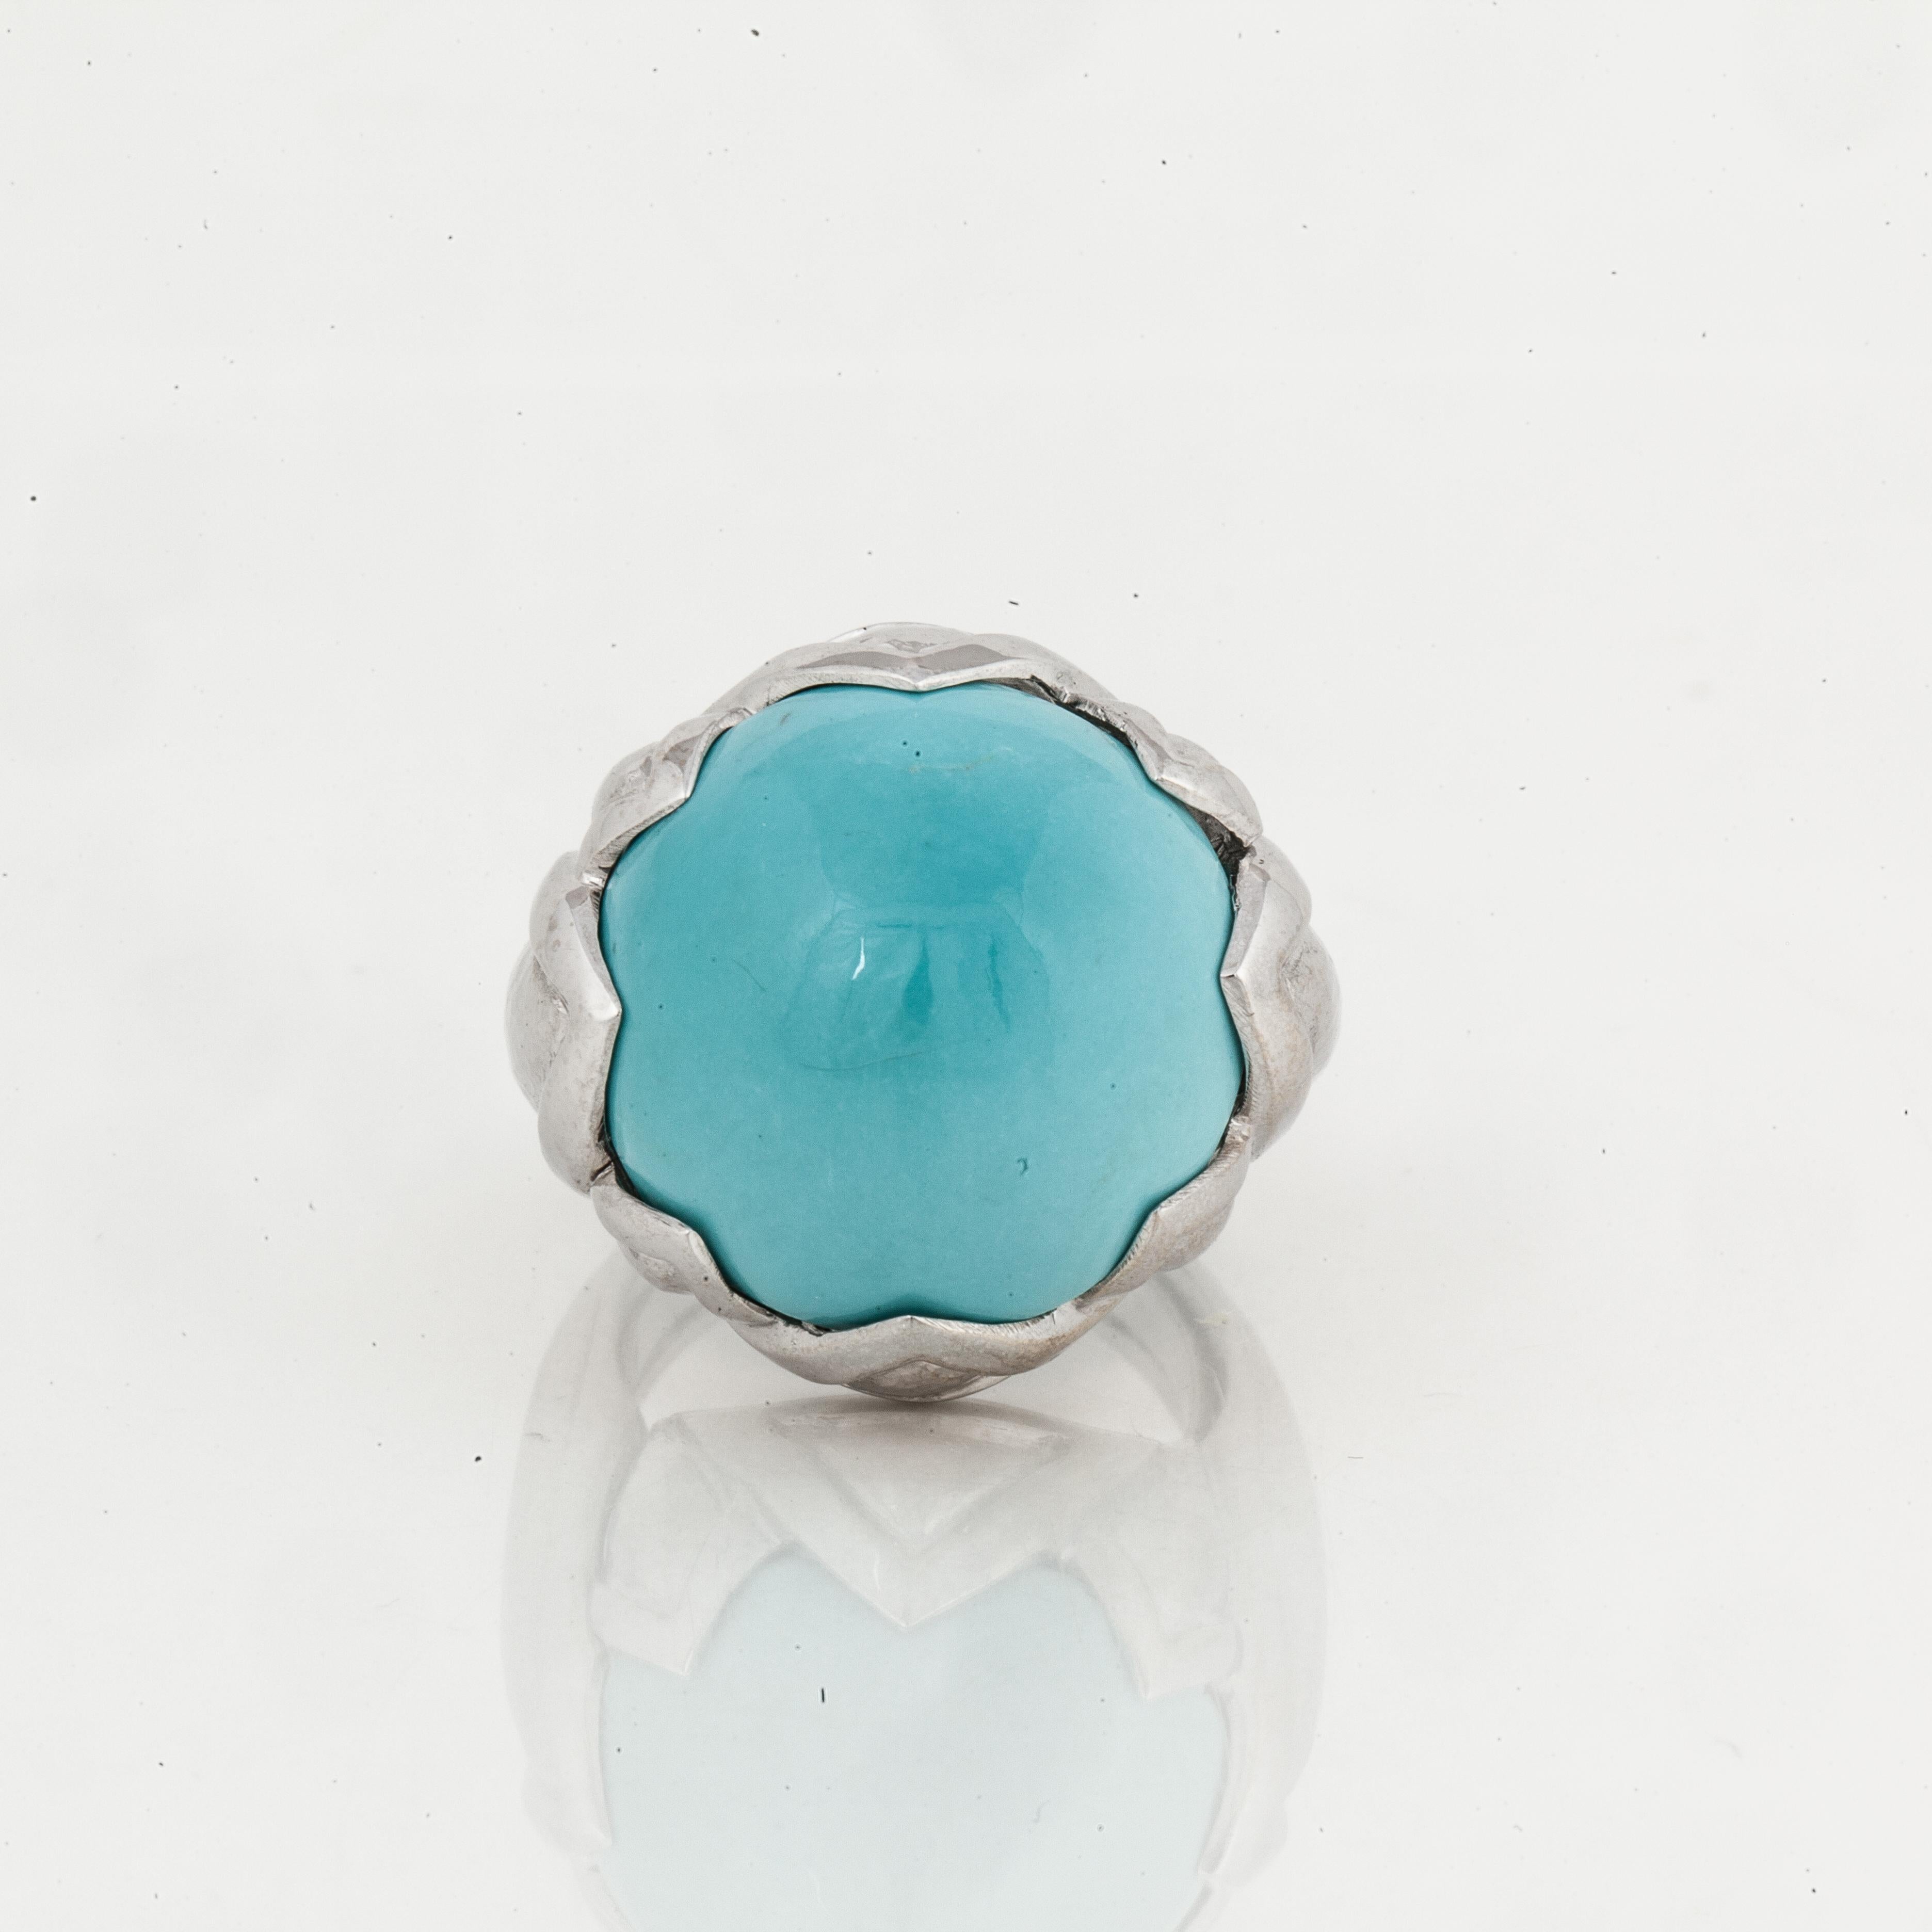 David Webb 18K white gold ring.  Features a round cabochon turquoise stone in the center.  The metal is hammered with the gold work coming up and around the turquoise. Ring is currently a Size 5 with a butterfly.  Measures 7/8